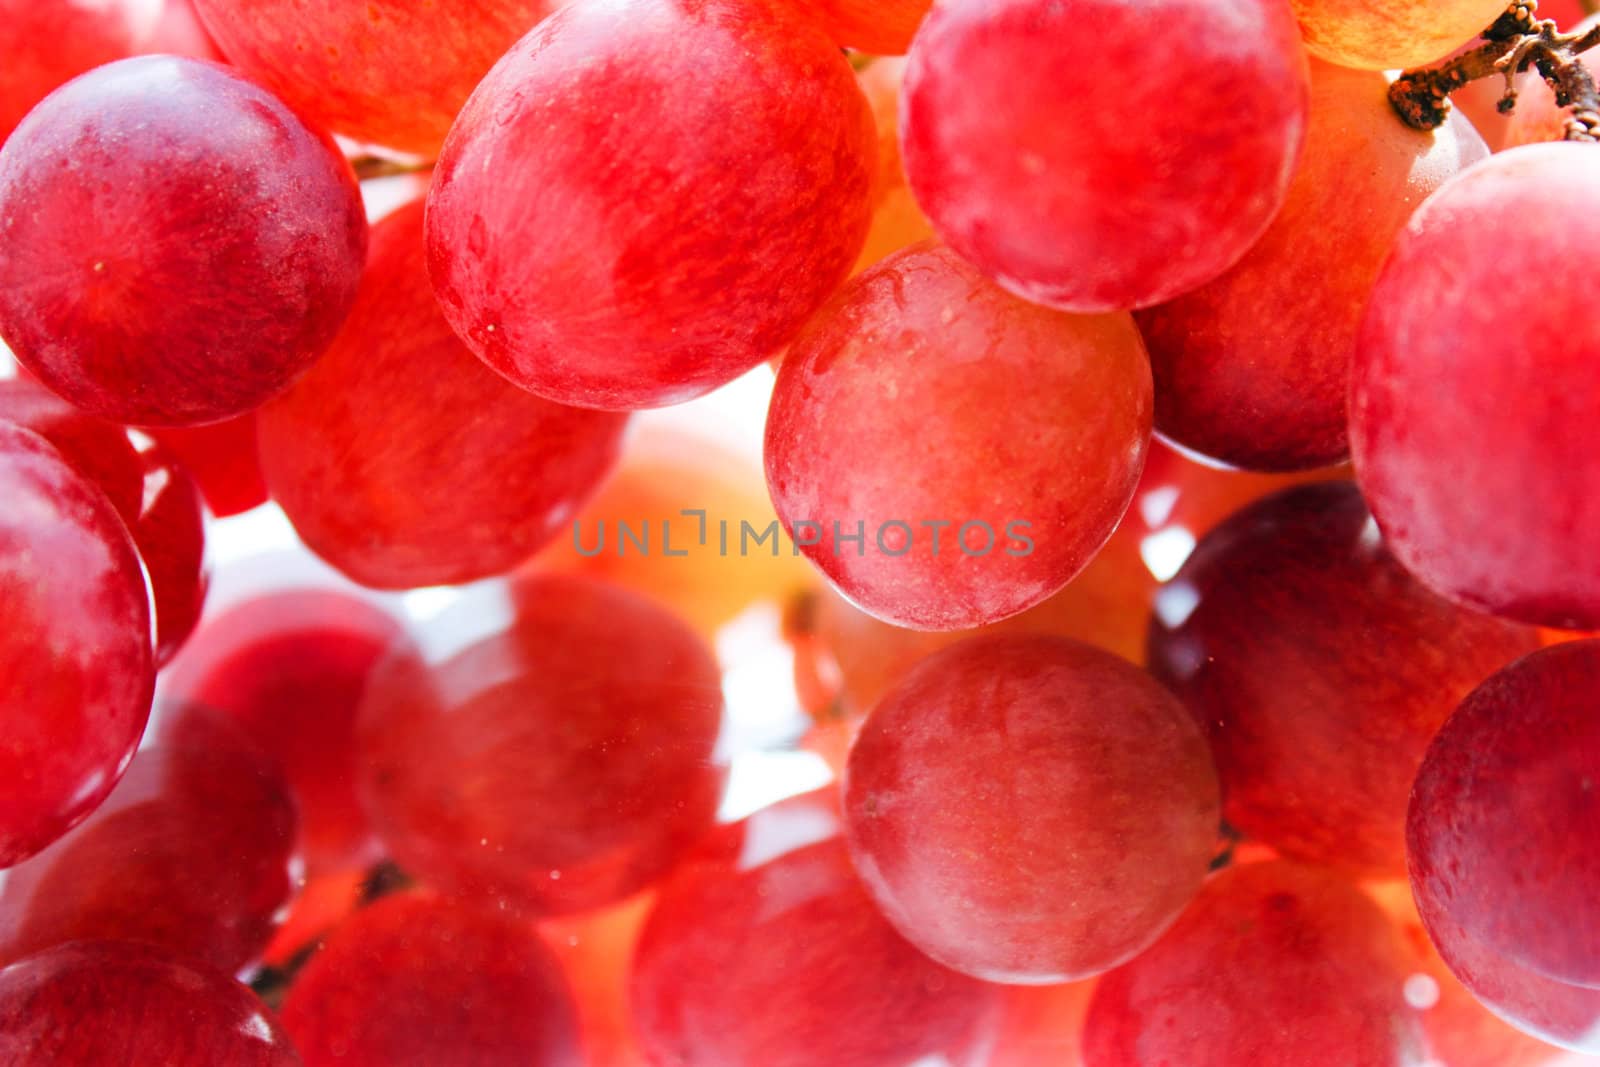 vine, juicy grapes, grape berries large, a reflection of grapes, aromatic grape, a new crop, fresh berries